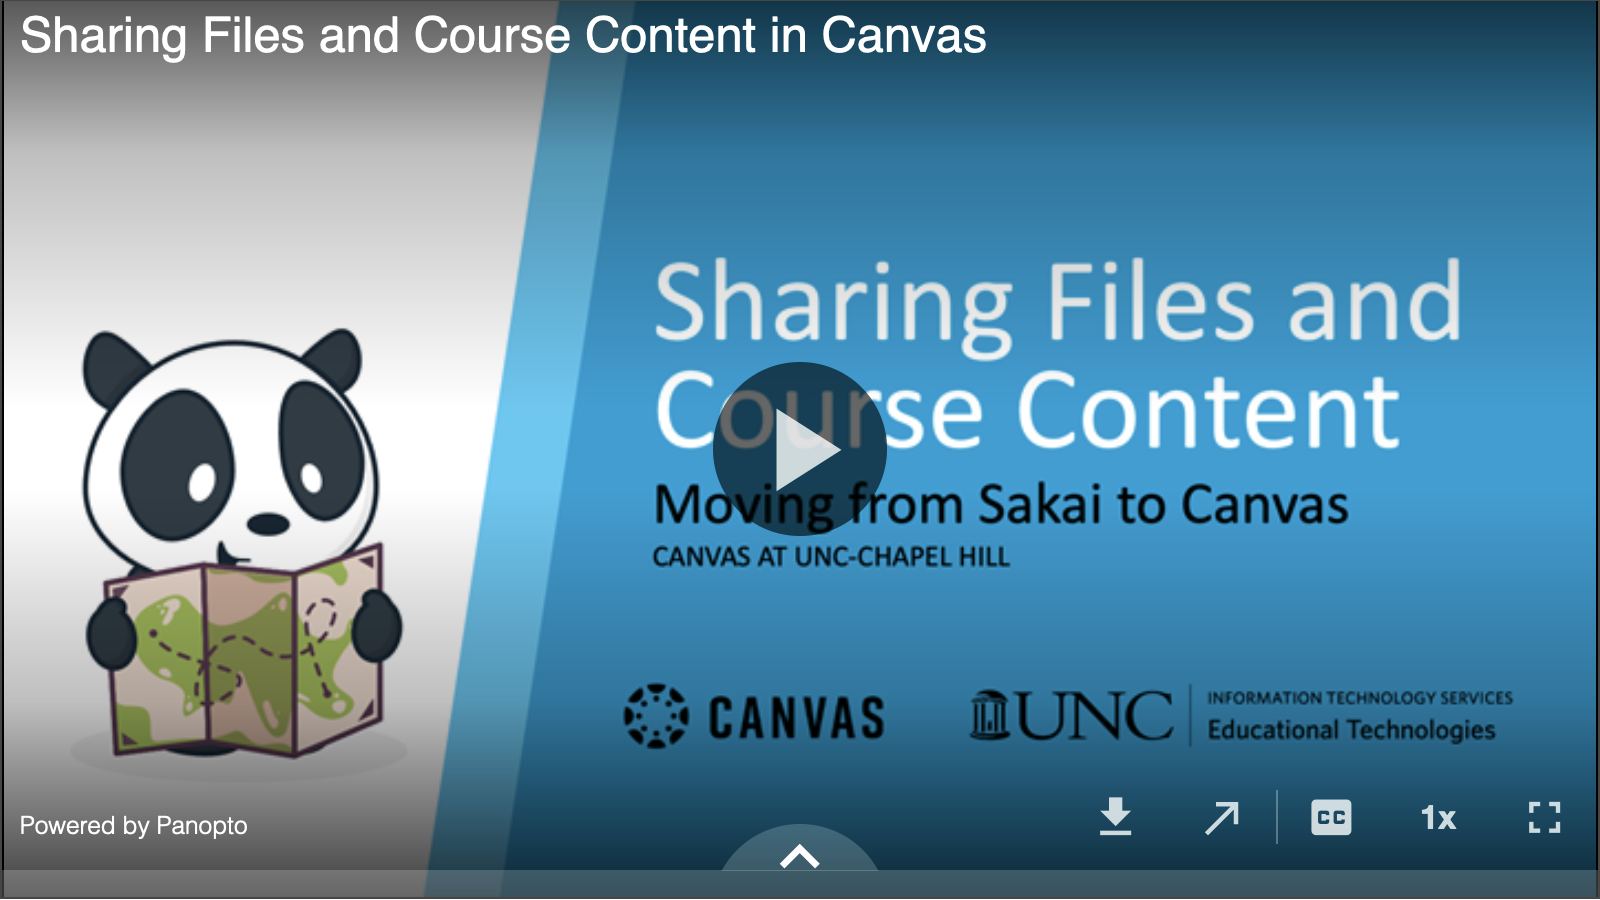 View recording on sharing Canvas files and course content